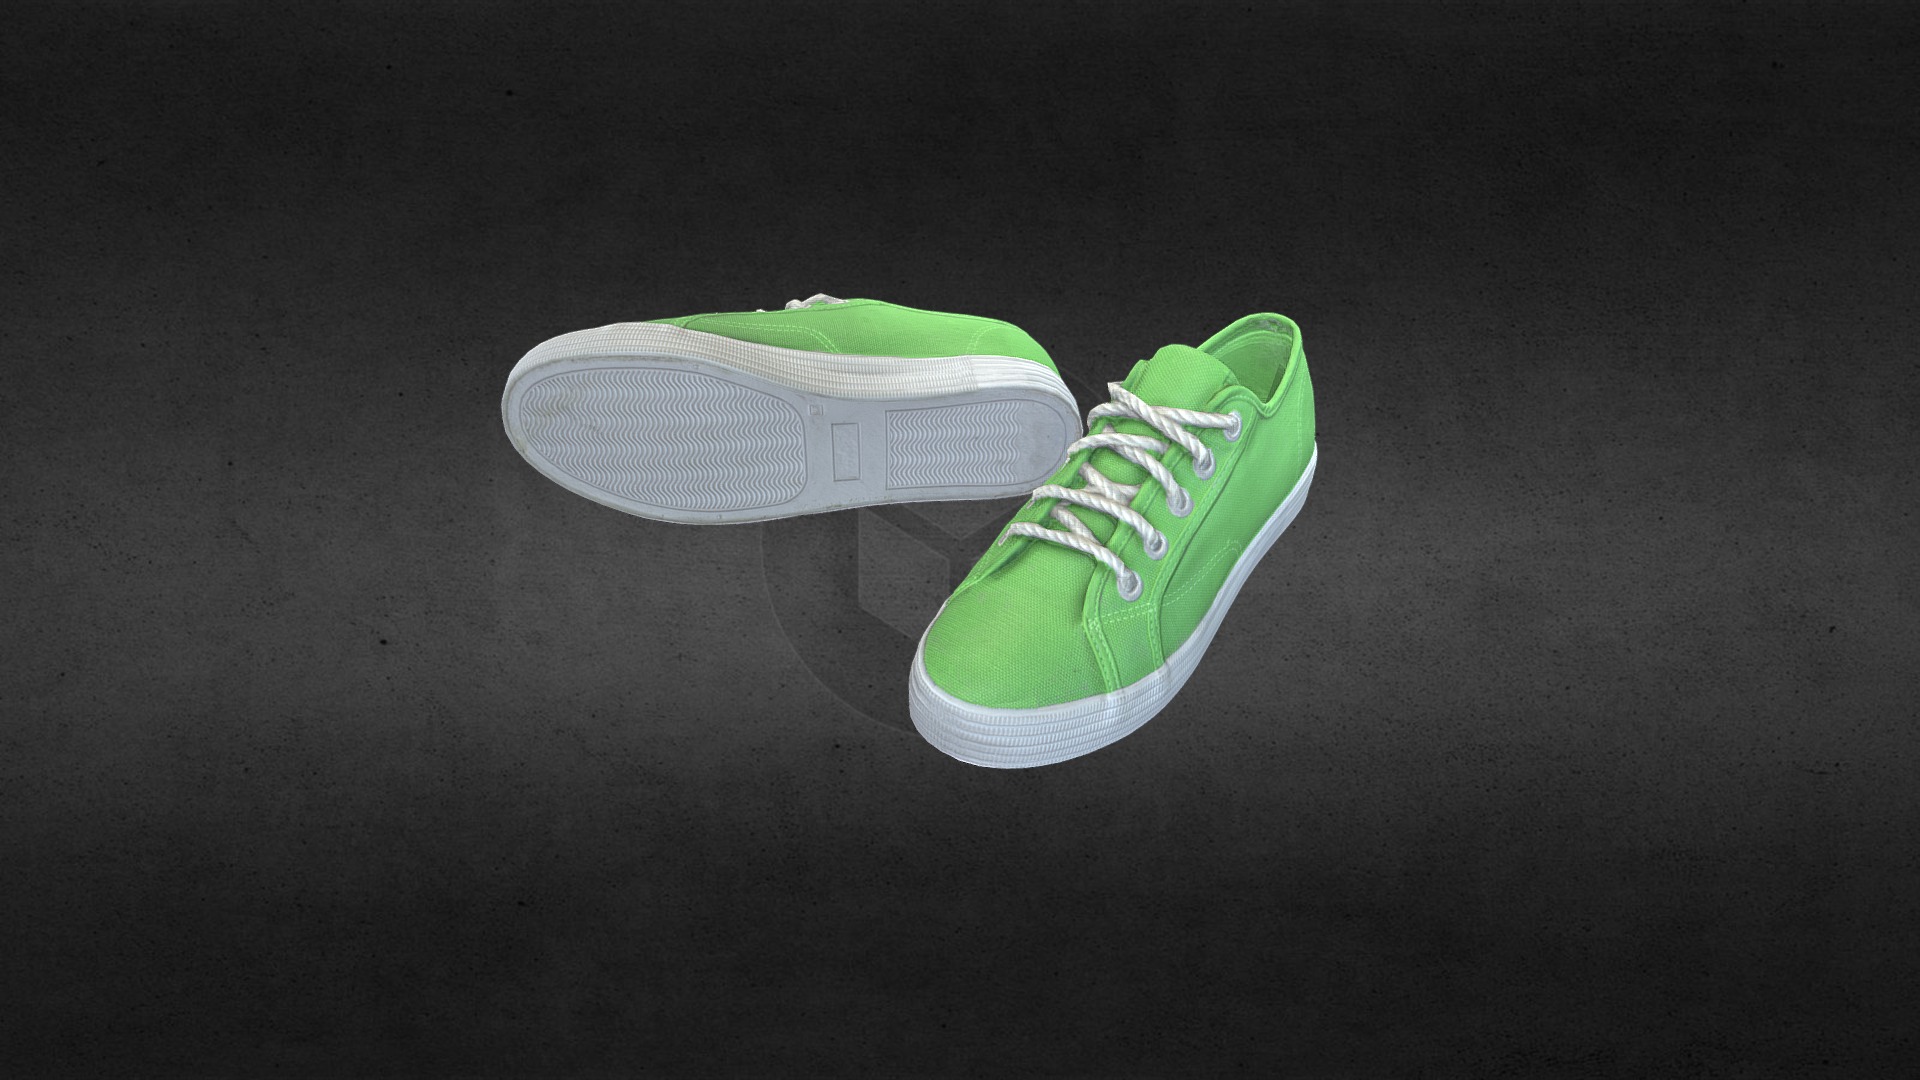 3D model Pair of spring shoes - This is a 3D model of the Pair of spring shoes. The 3D model is about a green and white logo.